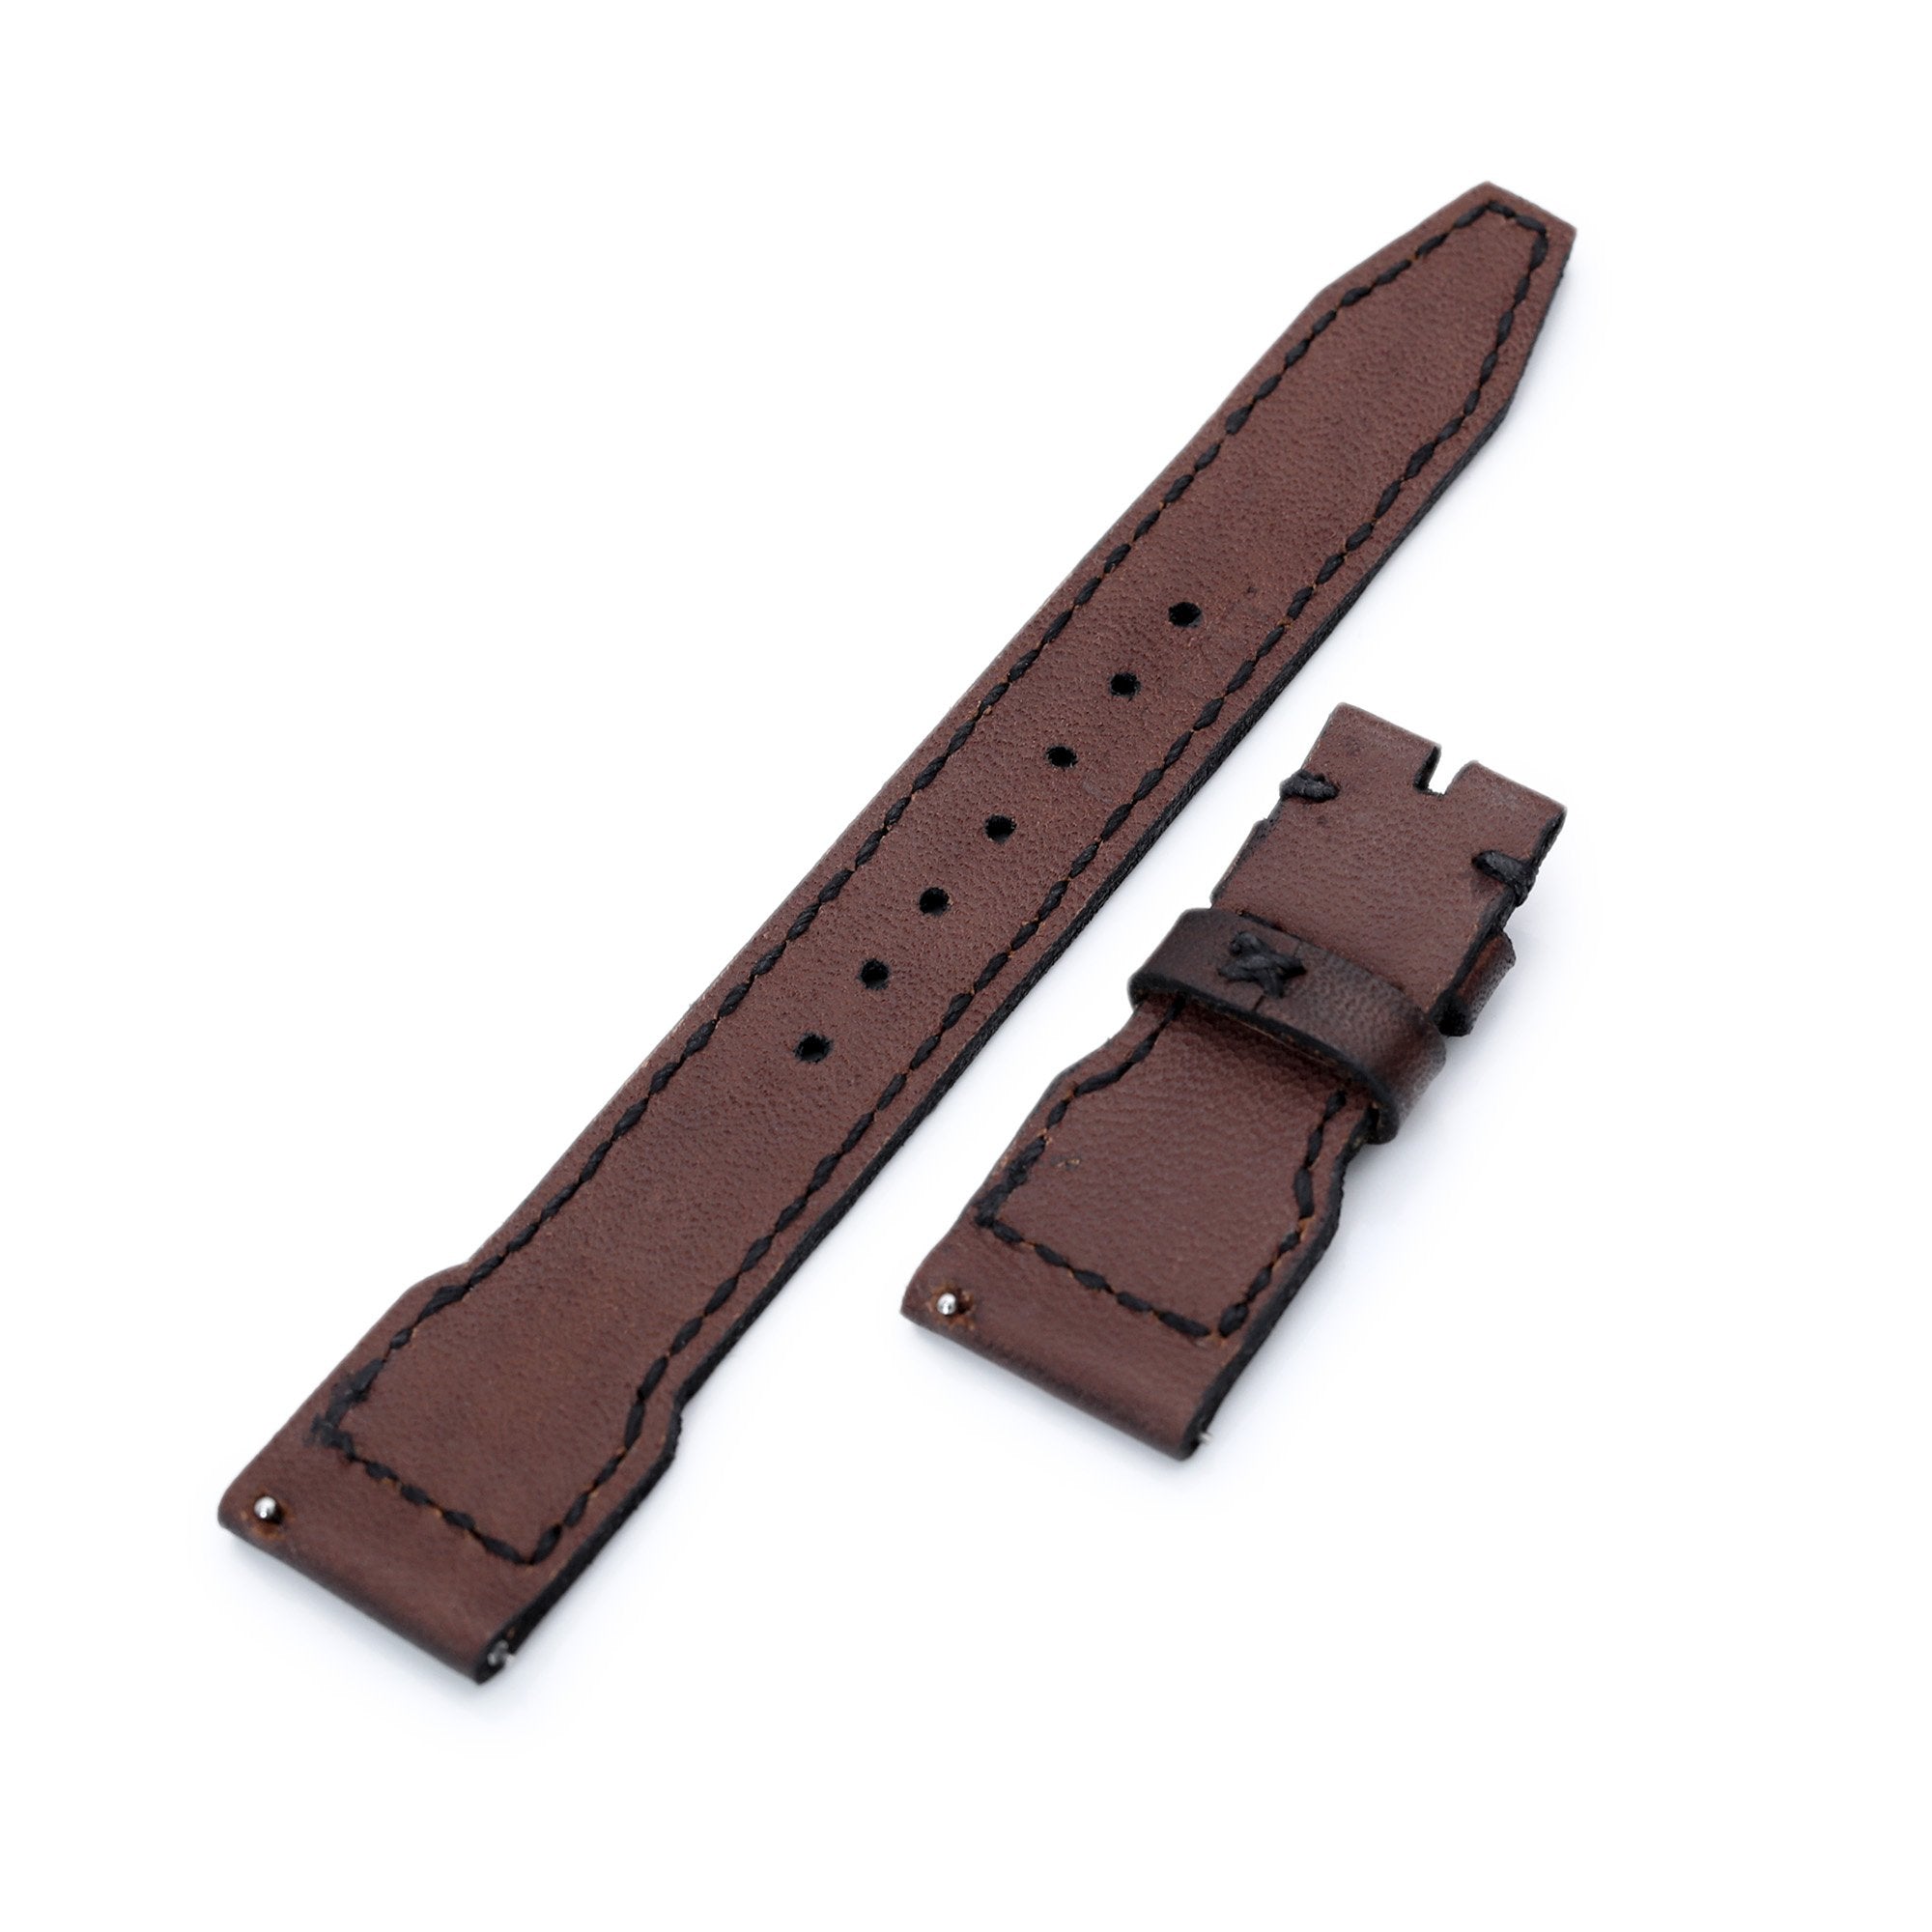 22mm Gunny X MT Dark Brown Handmade for IWC Big Pilot Quick Release Leather Watch Strap Strapcode Watch Bands